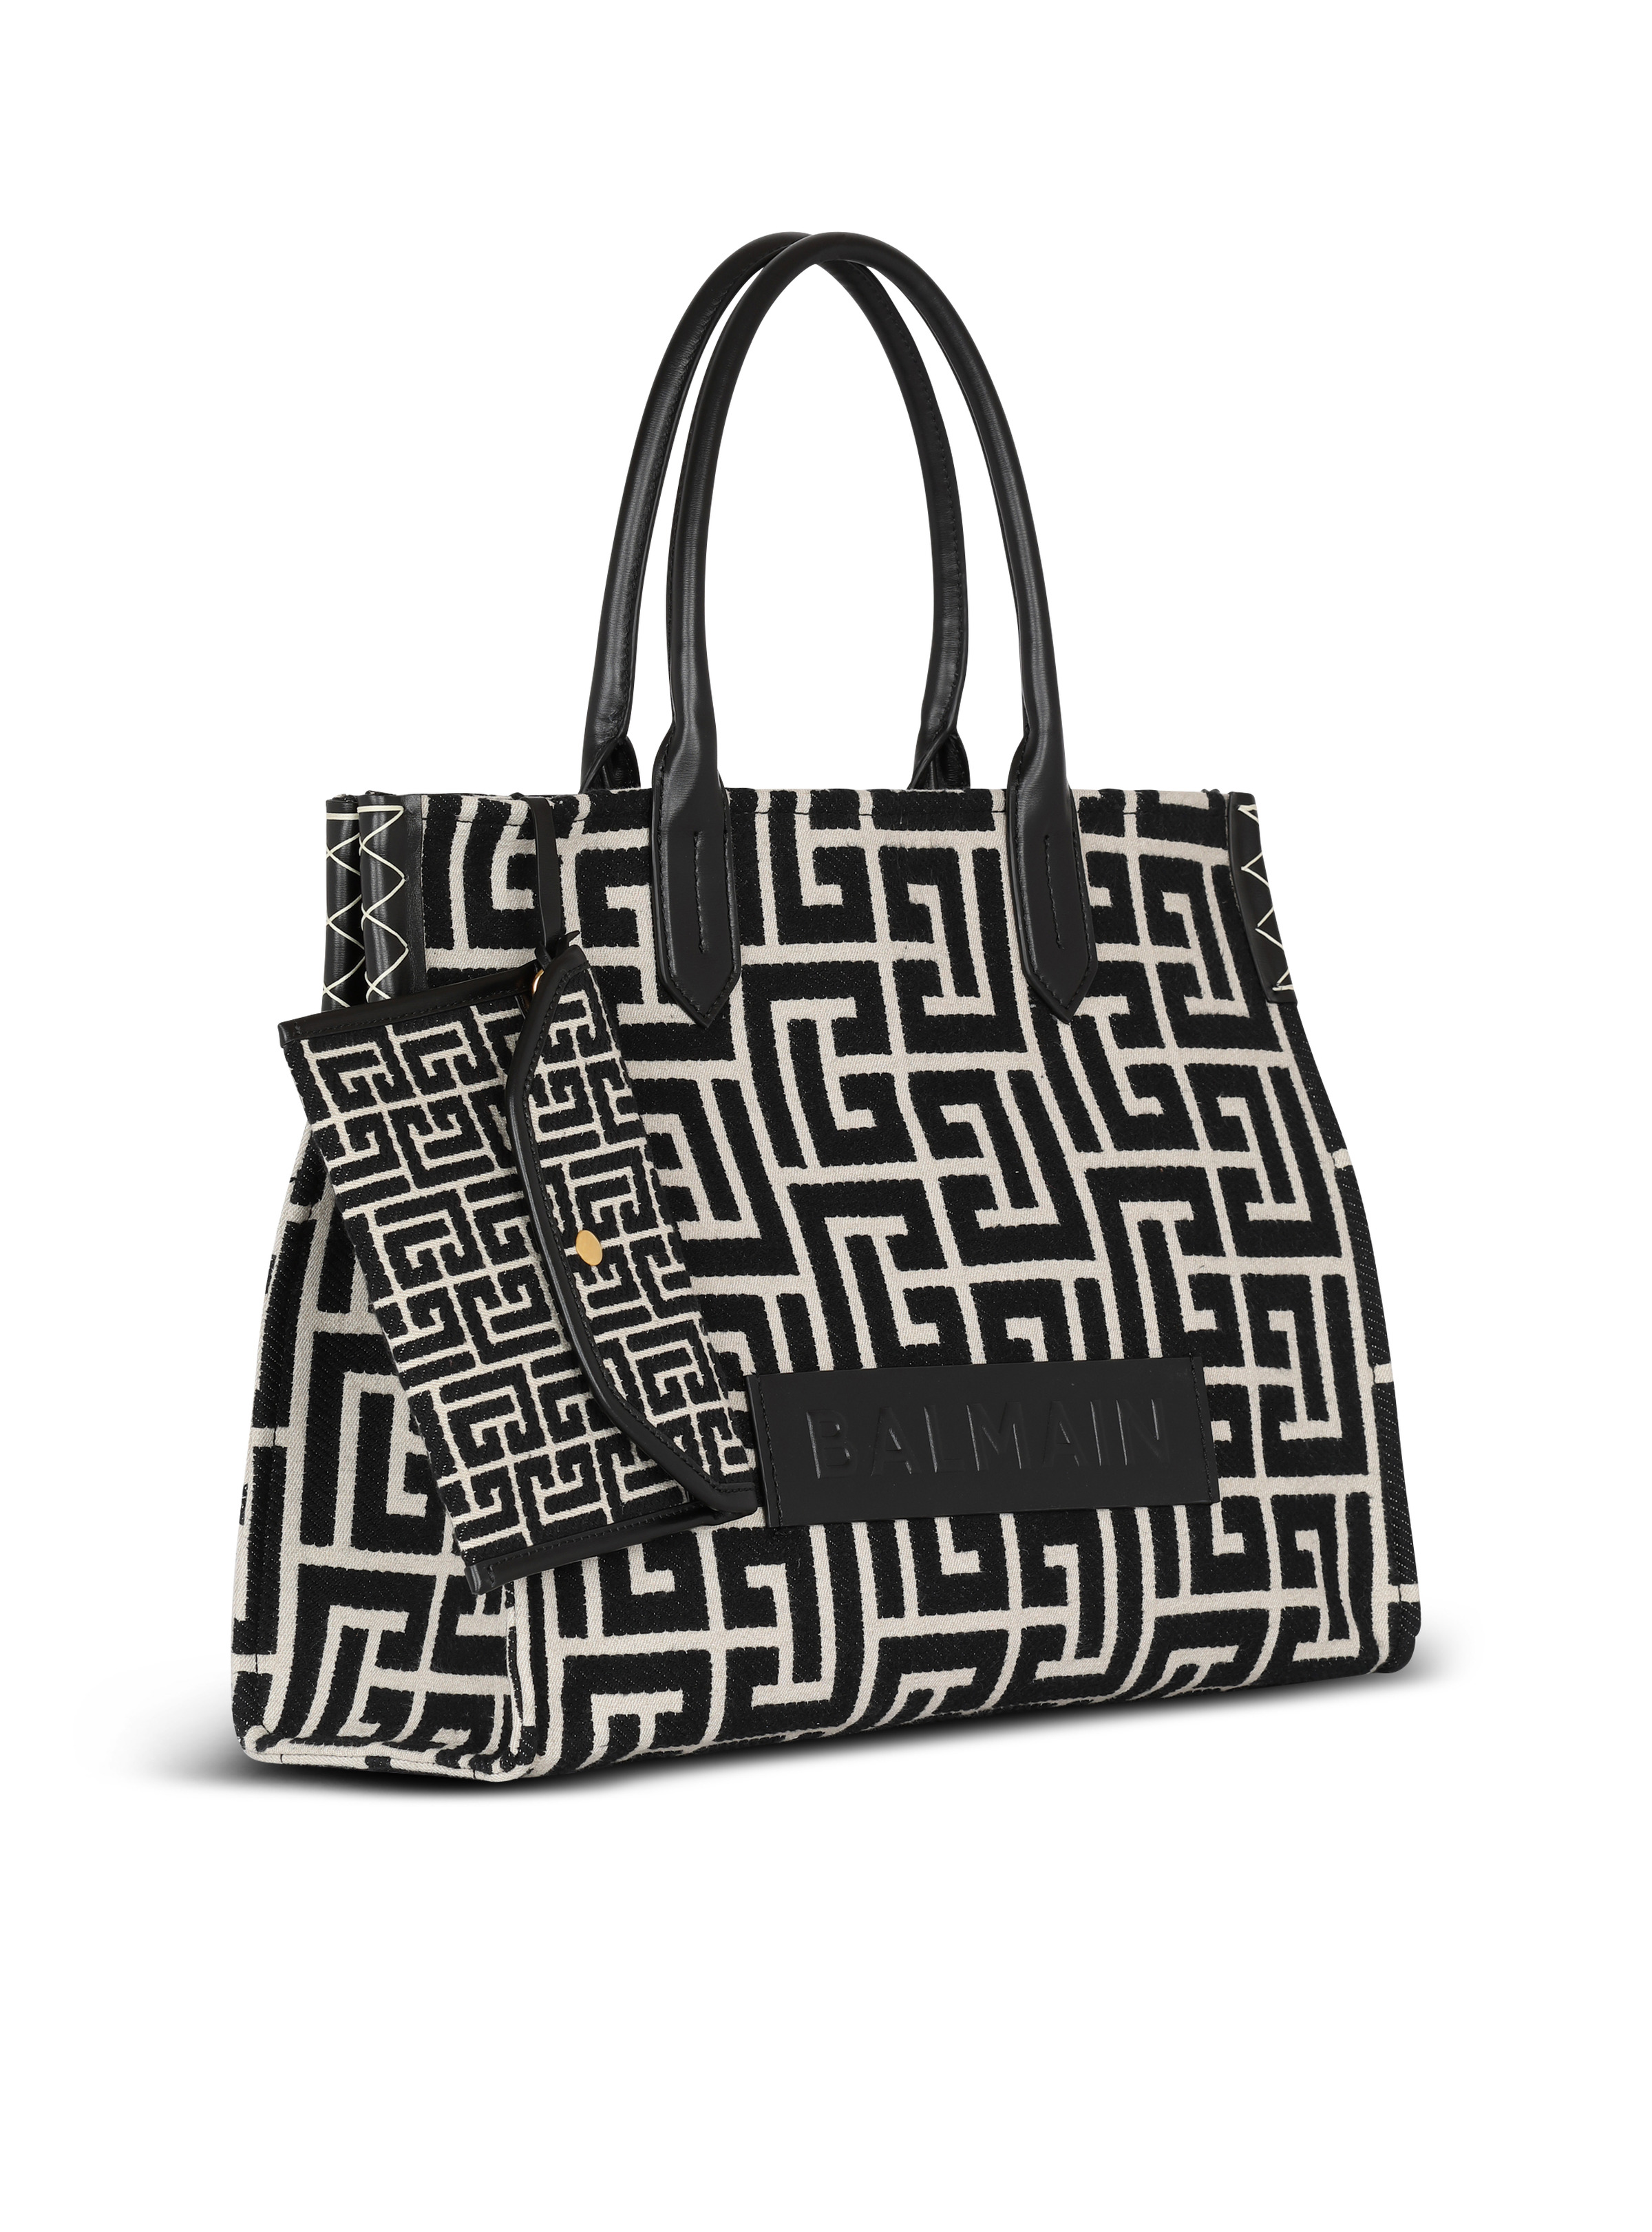 B-Army 42 monogrammed jacquard and leather tote bag - 3